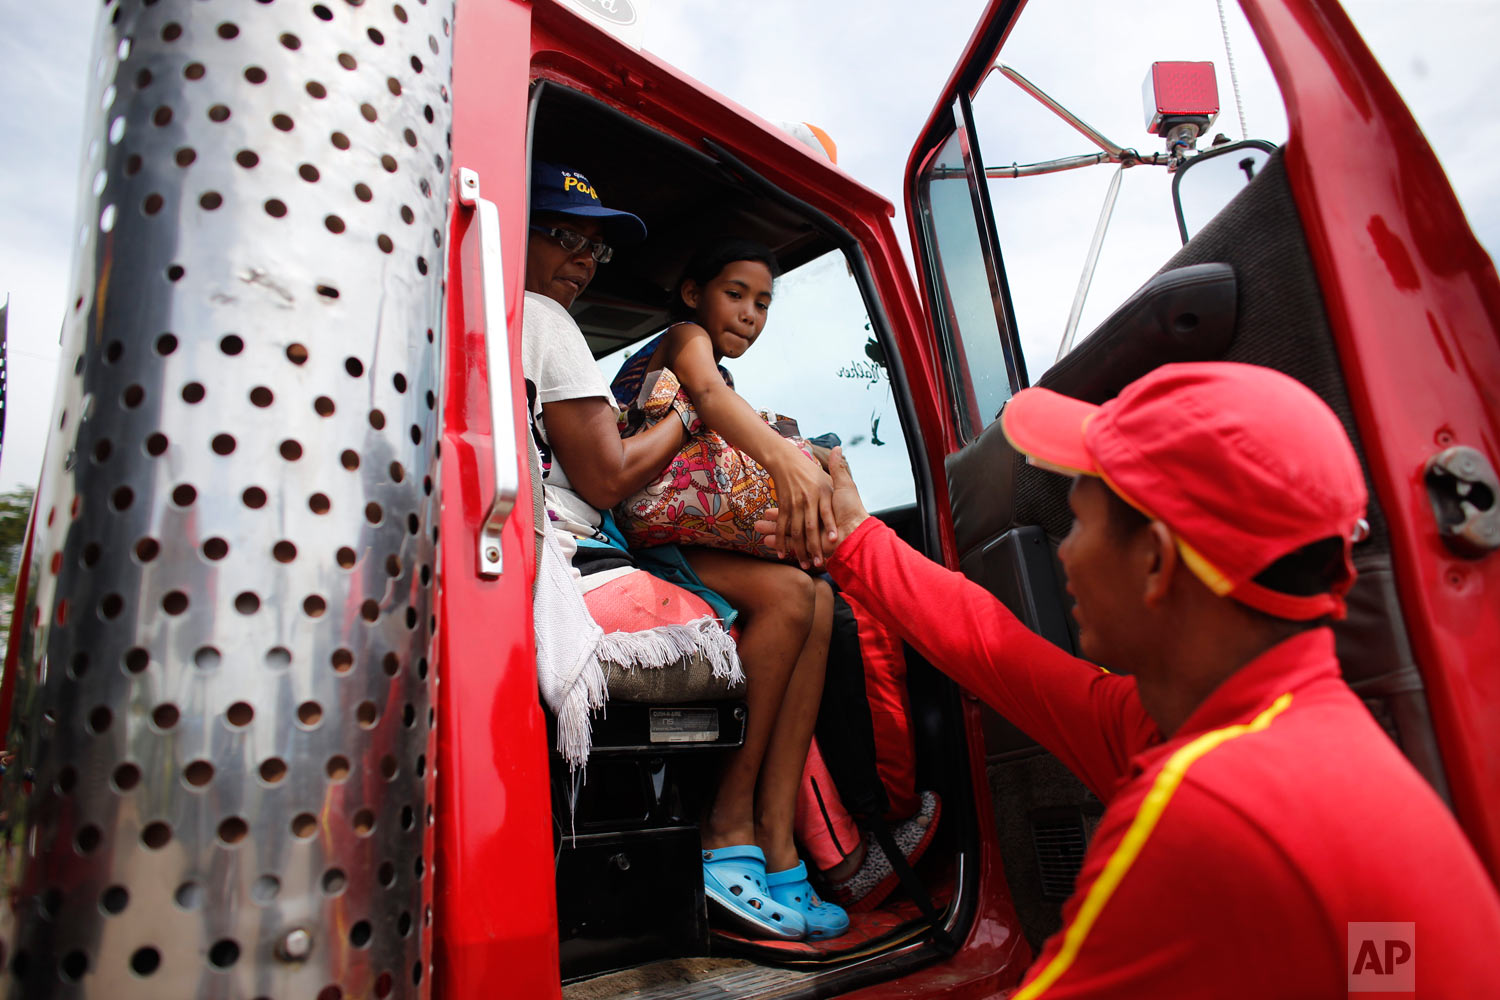  In this Sept. 3, 2018 photo, Venezuelan Sandra Cadiz and her 10-year-old daughter Angelis, thank gas station worker Manuel Velasquez after he helped them get a ride in the cabin of a truck in Peroles, Colombia, on their journey to Peru. Whenever the